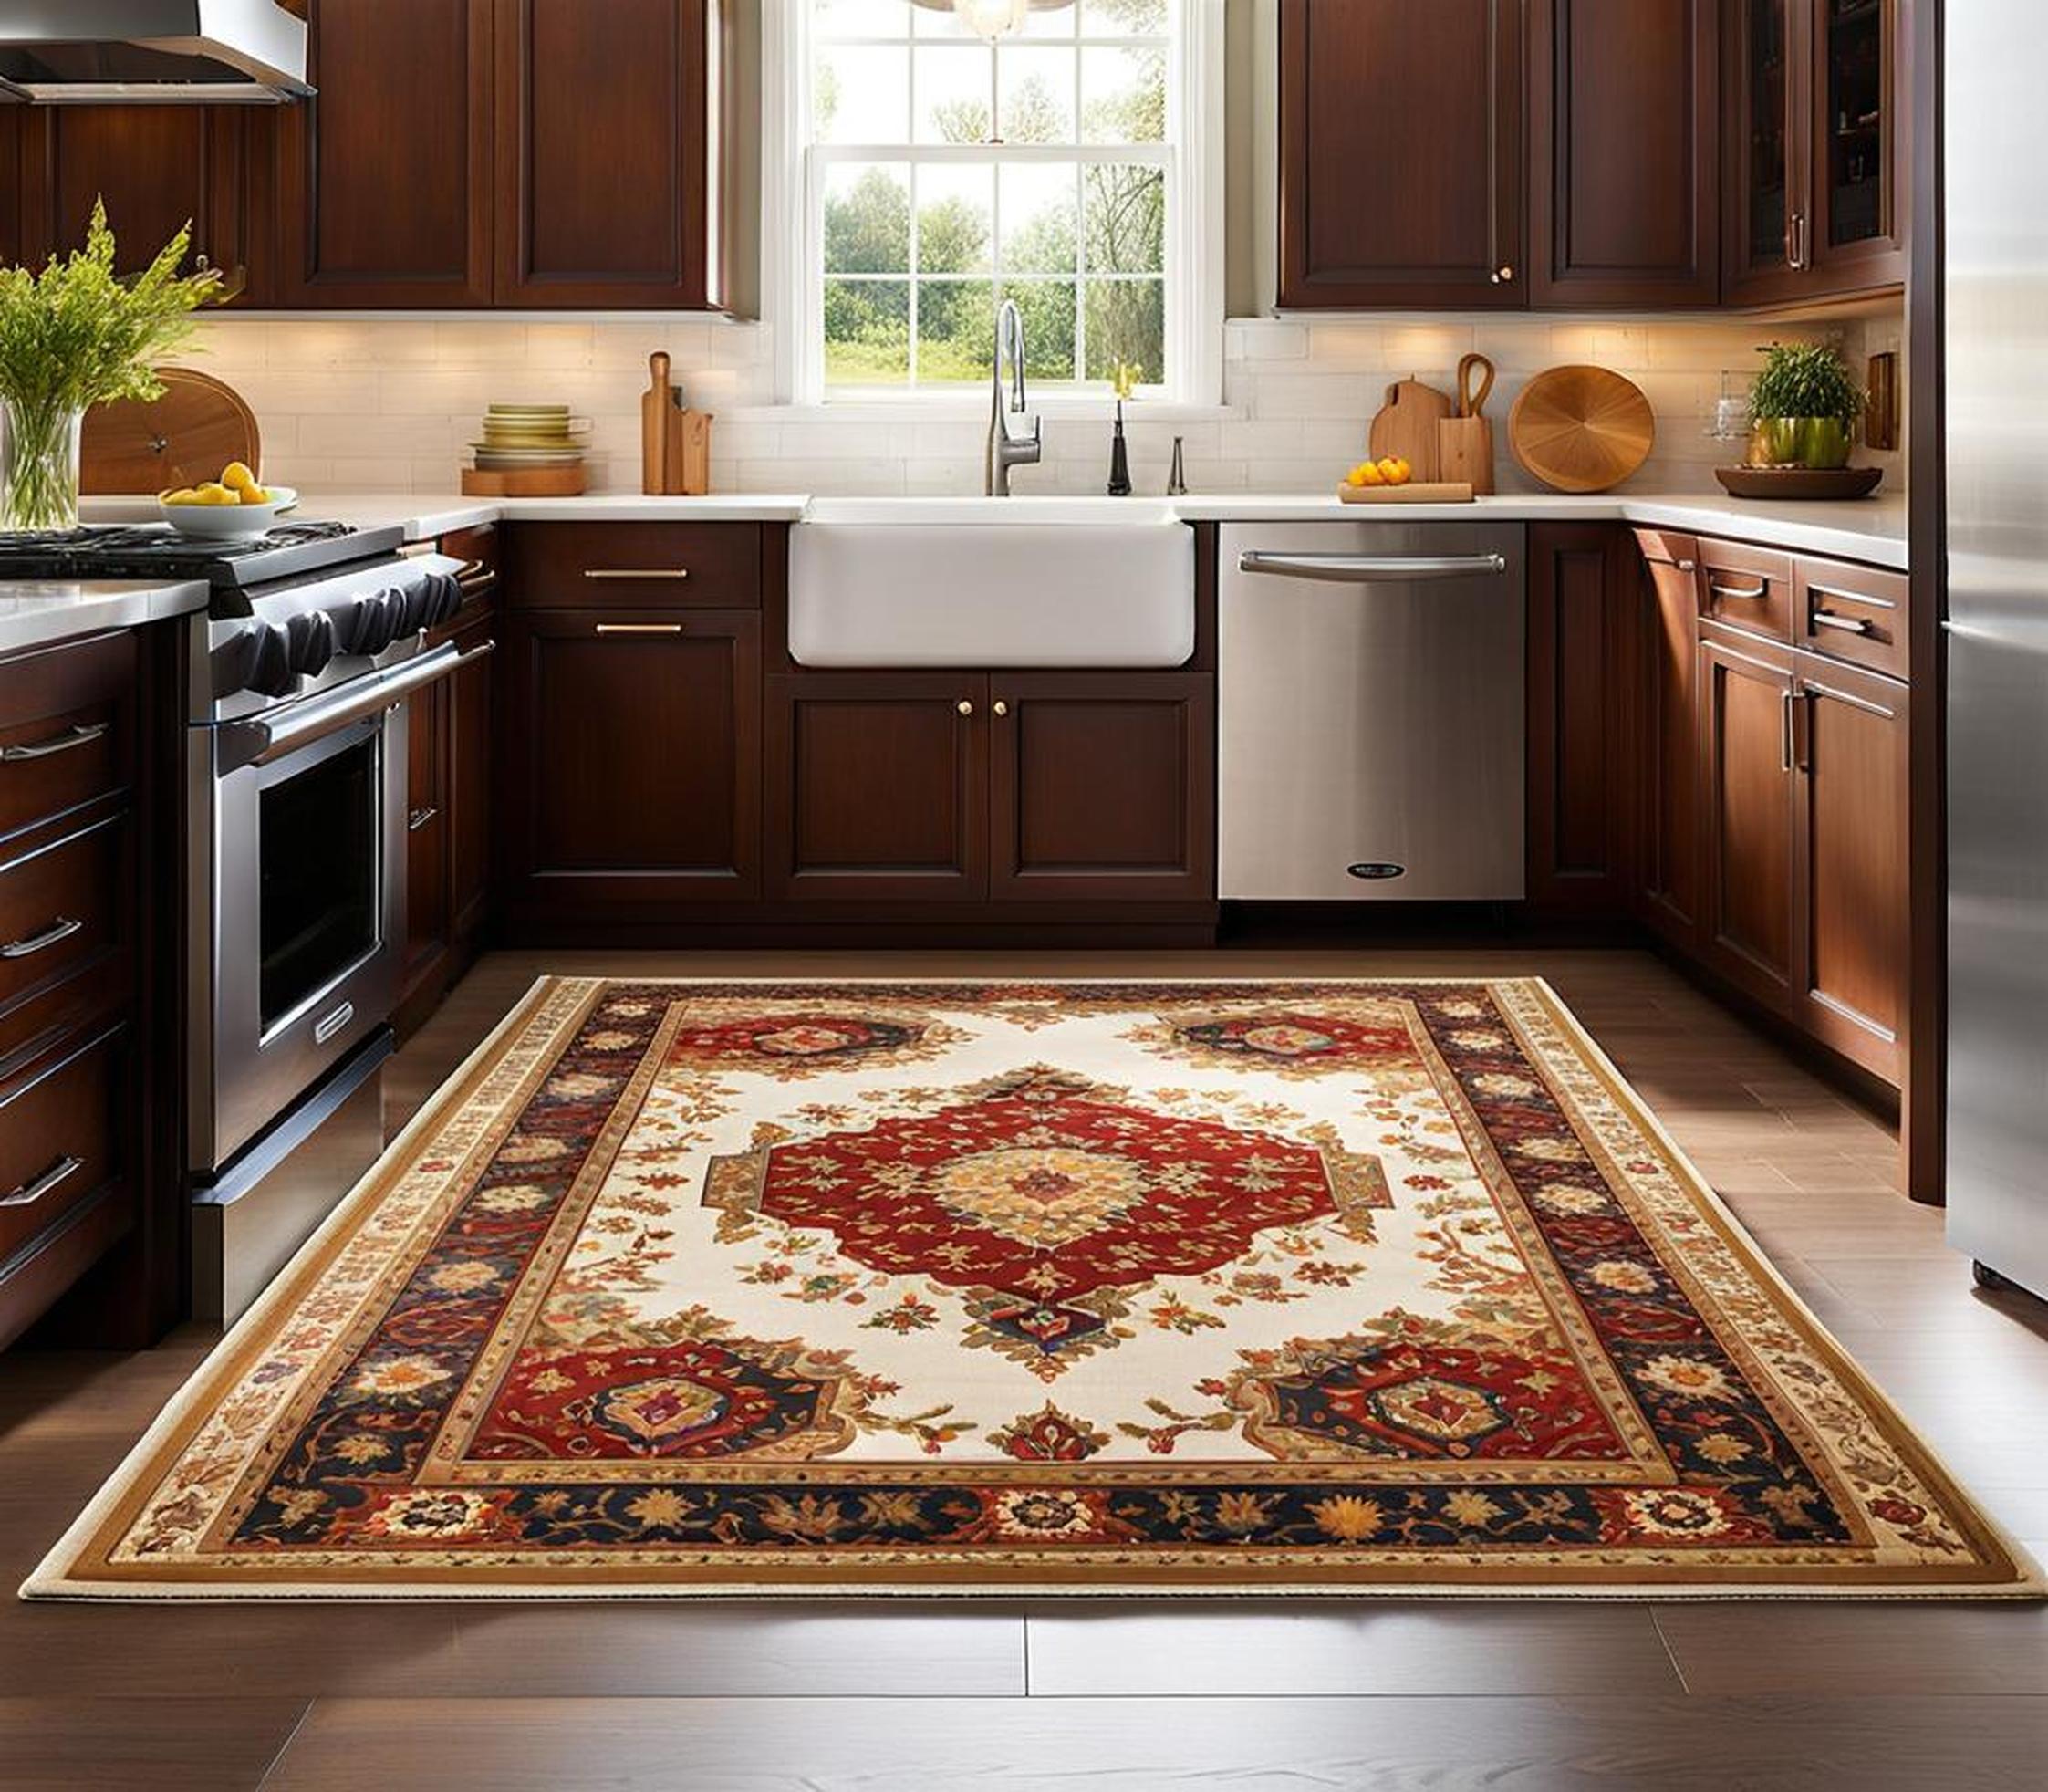 The Complete Guide to Rugs that Beautify and Protect Your Kitchen Sink Surroundings